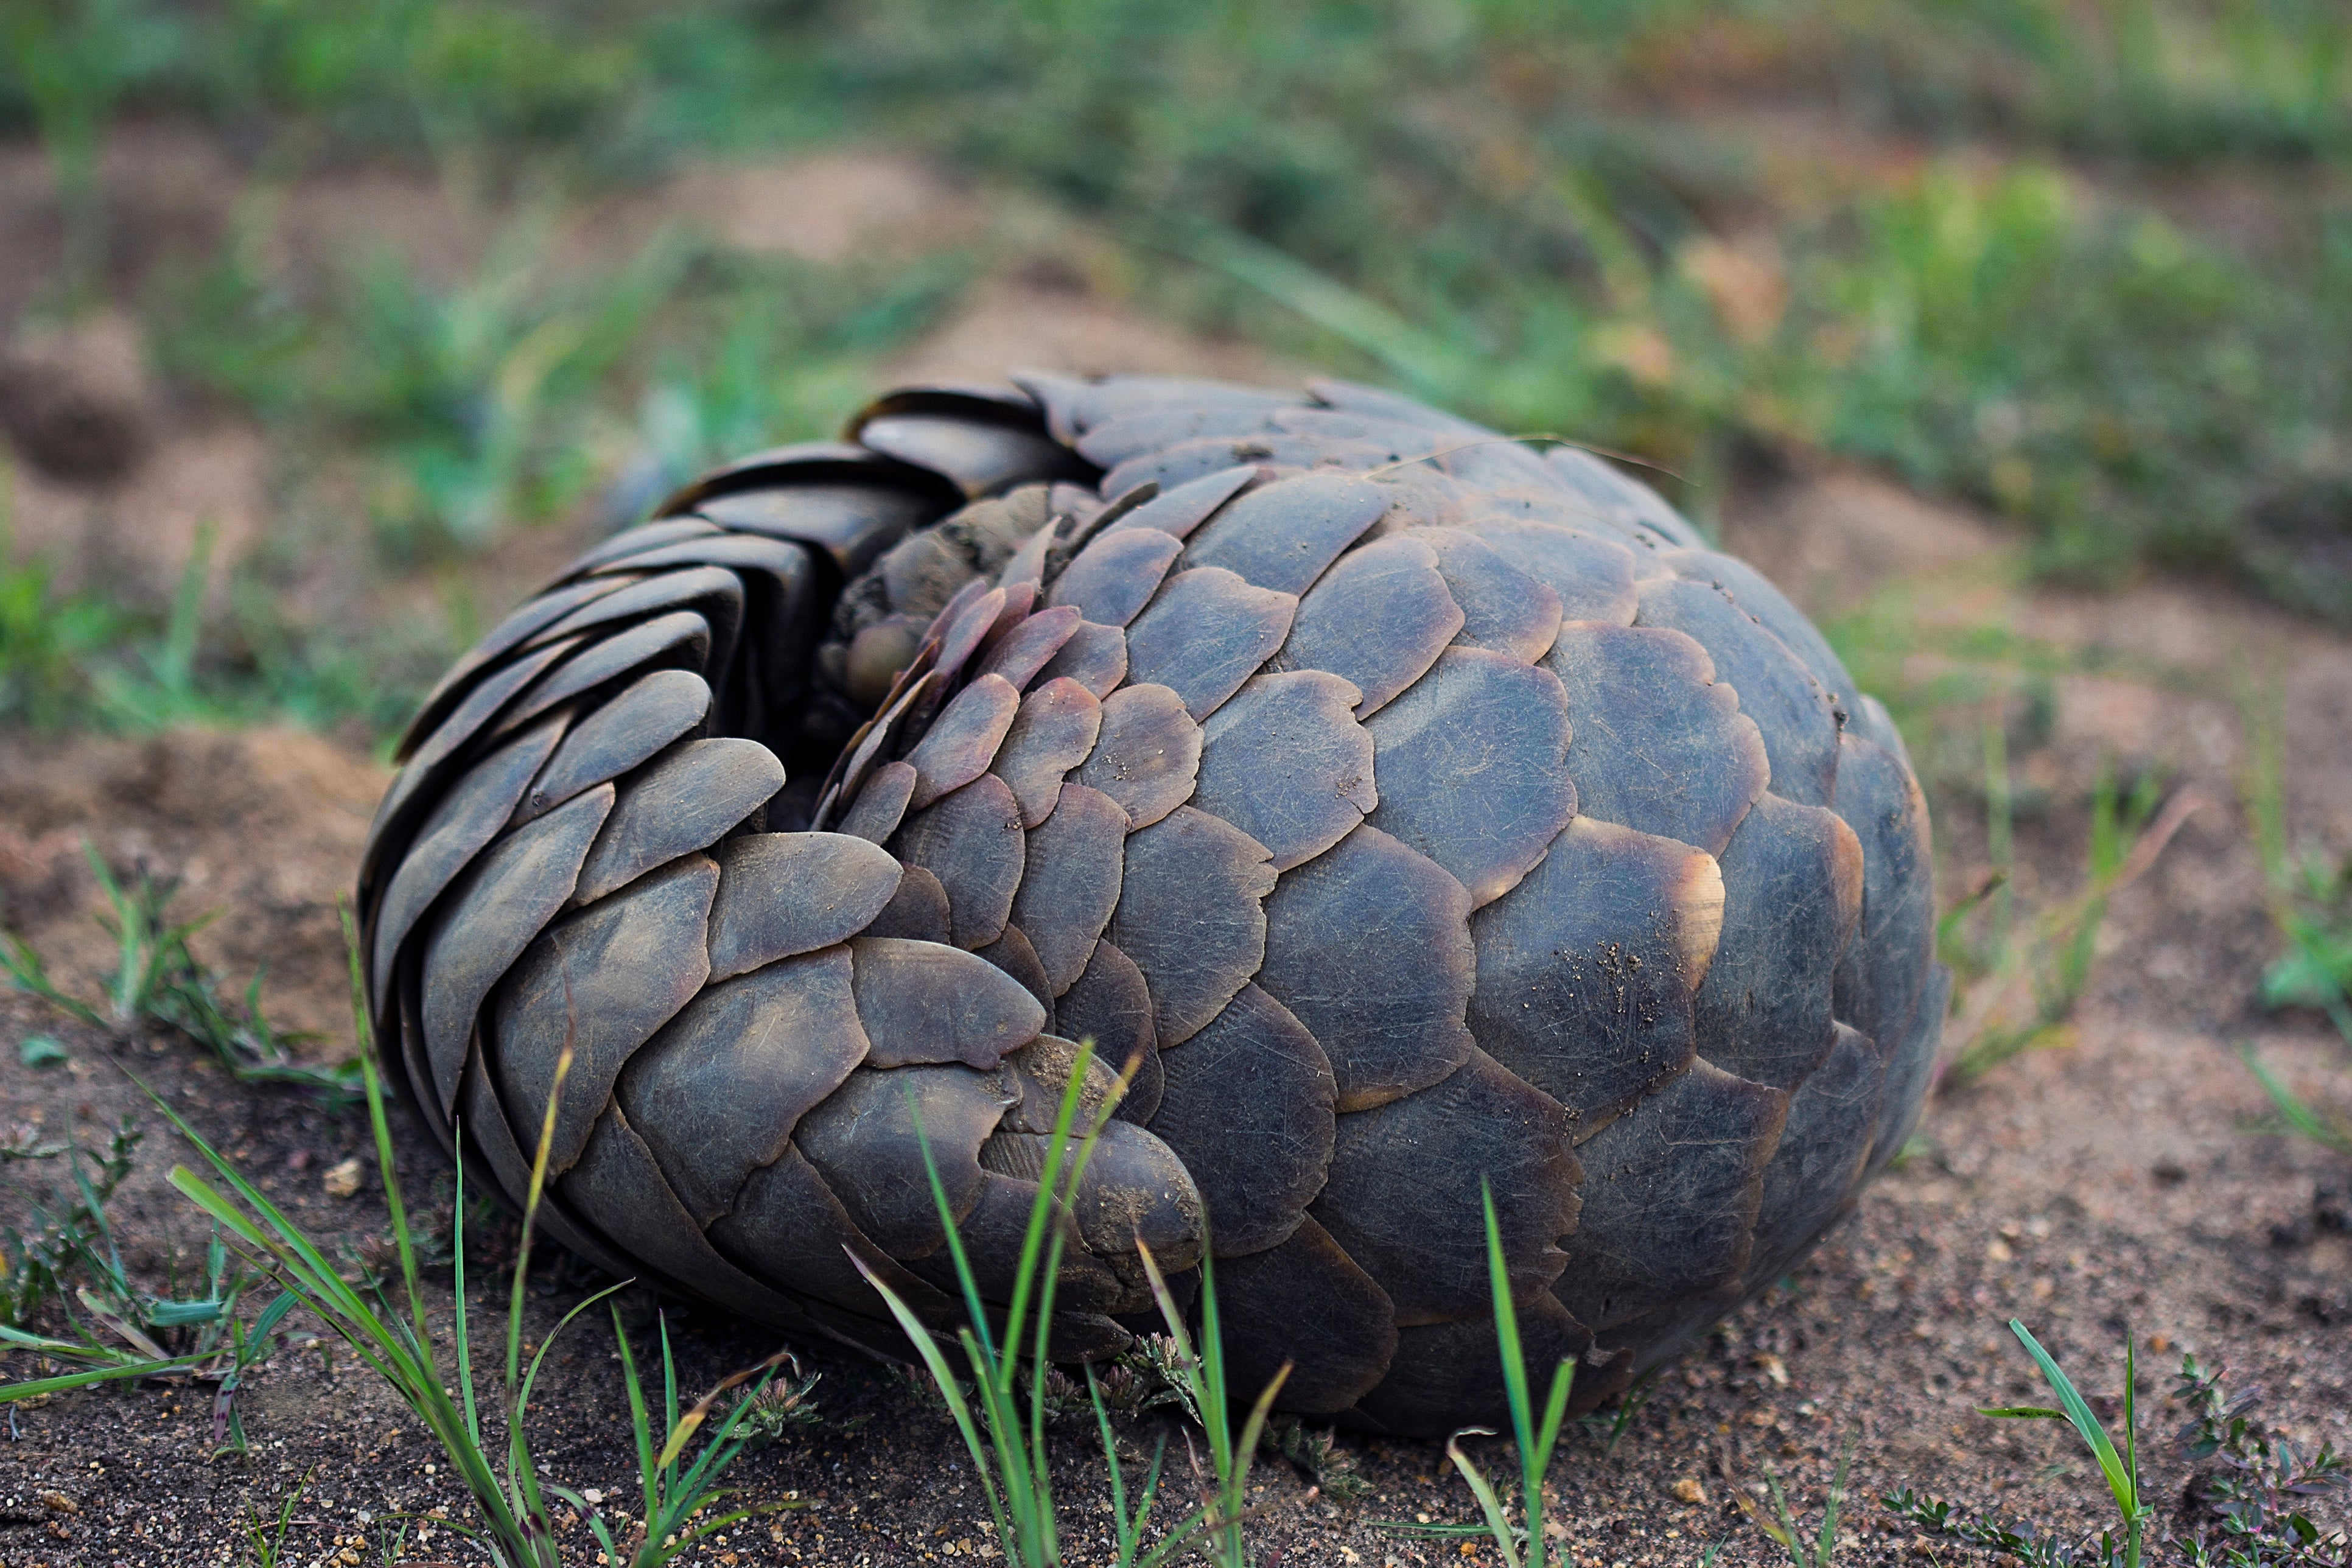 A curled up pangolin